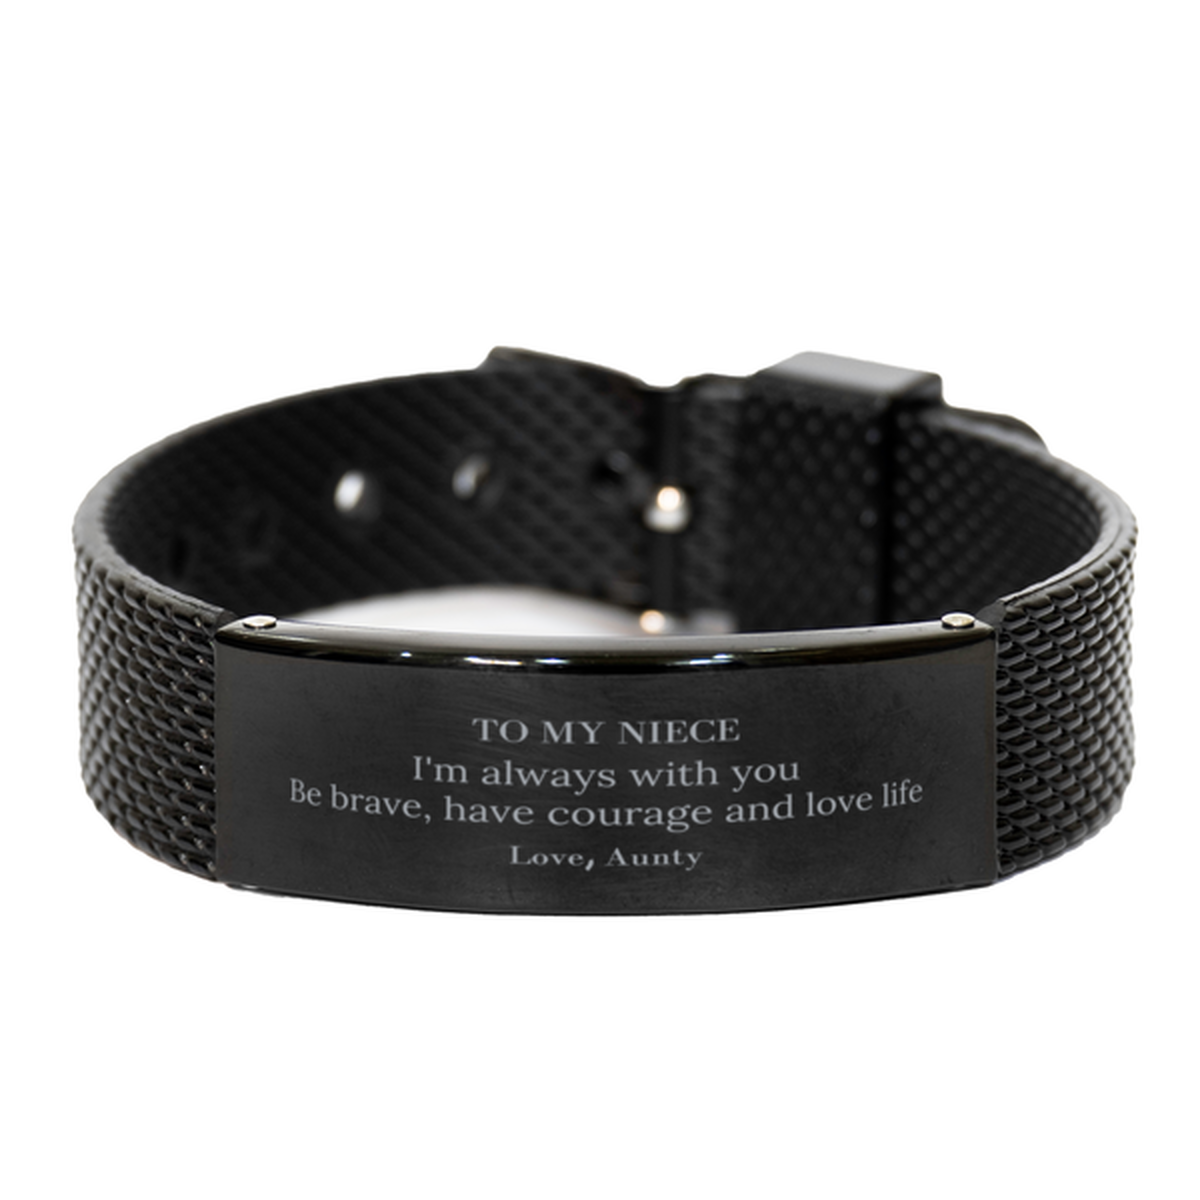 To My Niece Gifts from Aunty, Unique Black Shark Mesh Bracelet Inspirational Christmas Birthday Graduation Gifts for Niece I'm always with you. Be brave, have courage and love life. Love, Aunty